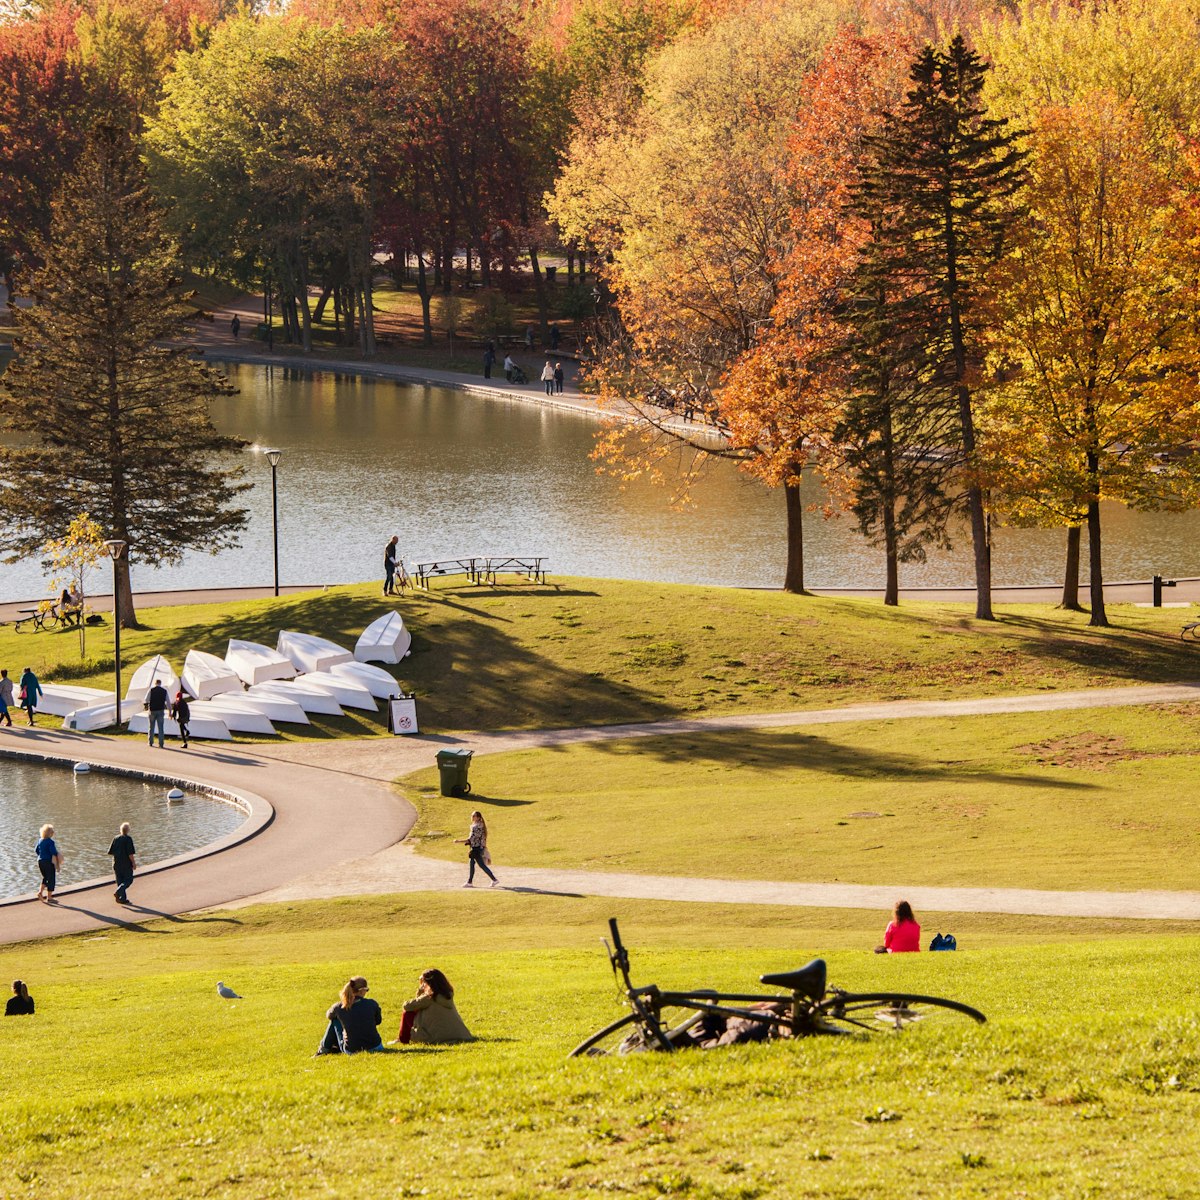 October 18, 2017: Visitors seated on the grass around a lake in Mont Royal Park during autumn.